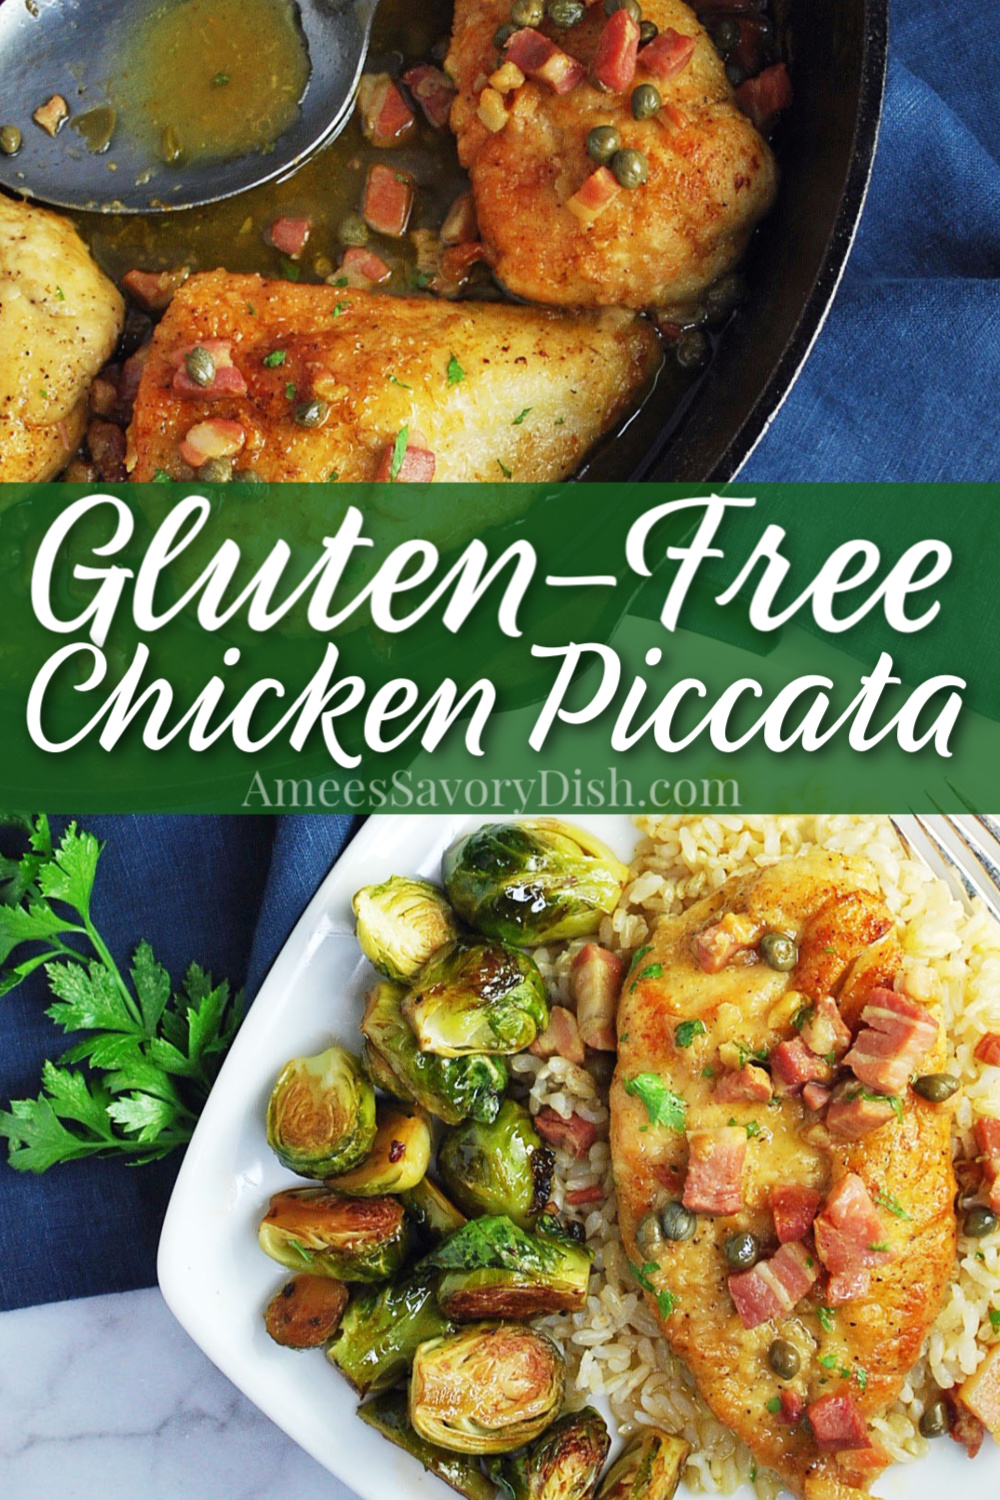 A simple gluten-free chicken piccata recipe that's perfect for a busy weeknight meal made with finely diced pancetta, capers, lemon, and butter. #chickenrecipe #chickenpiccata #glutenfreechicken #glutenfreerecipe #easyfamilymeals #chicken via @Ameessavorydish